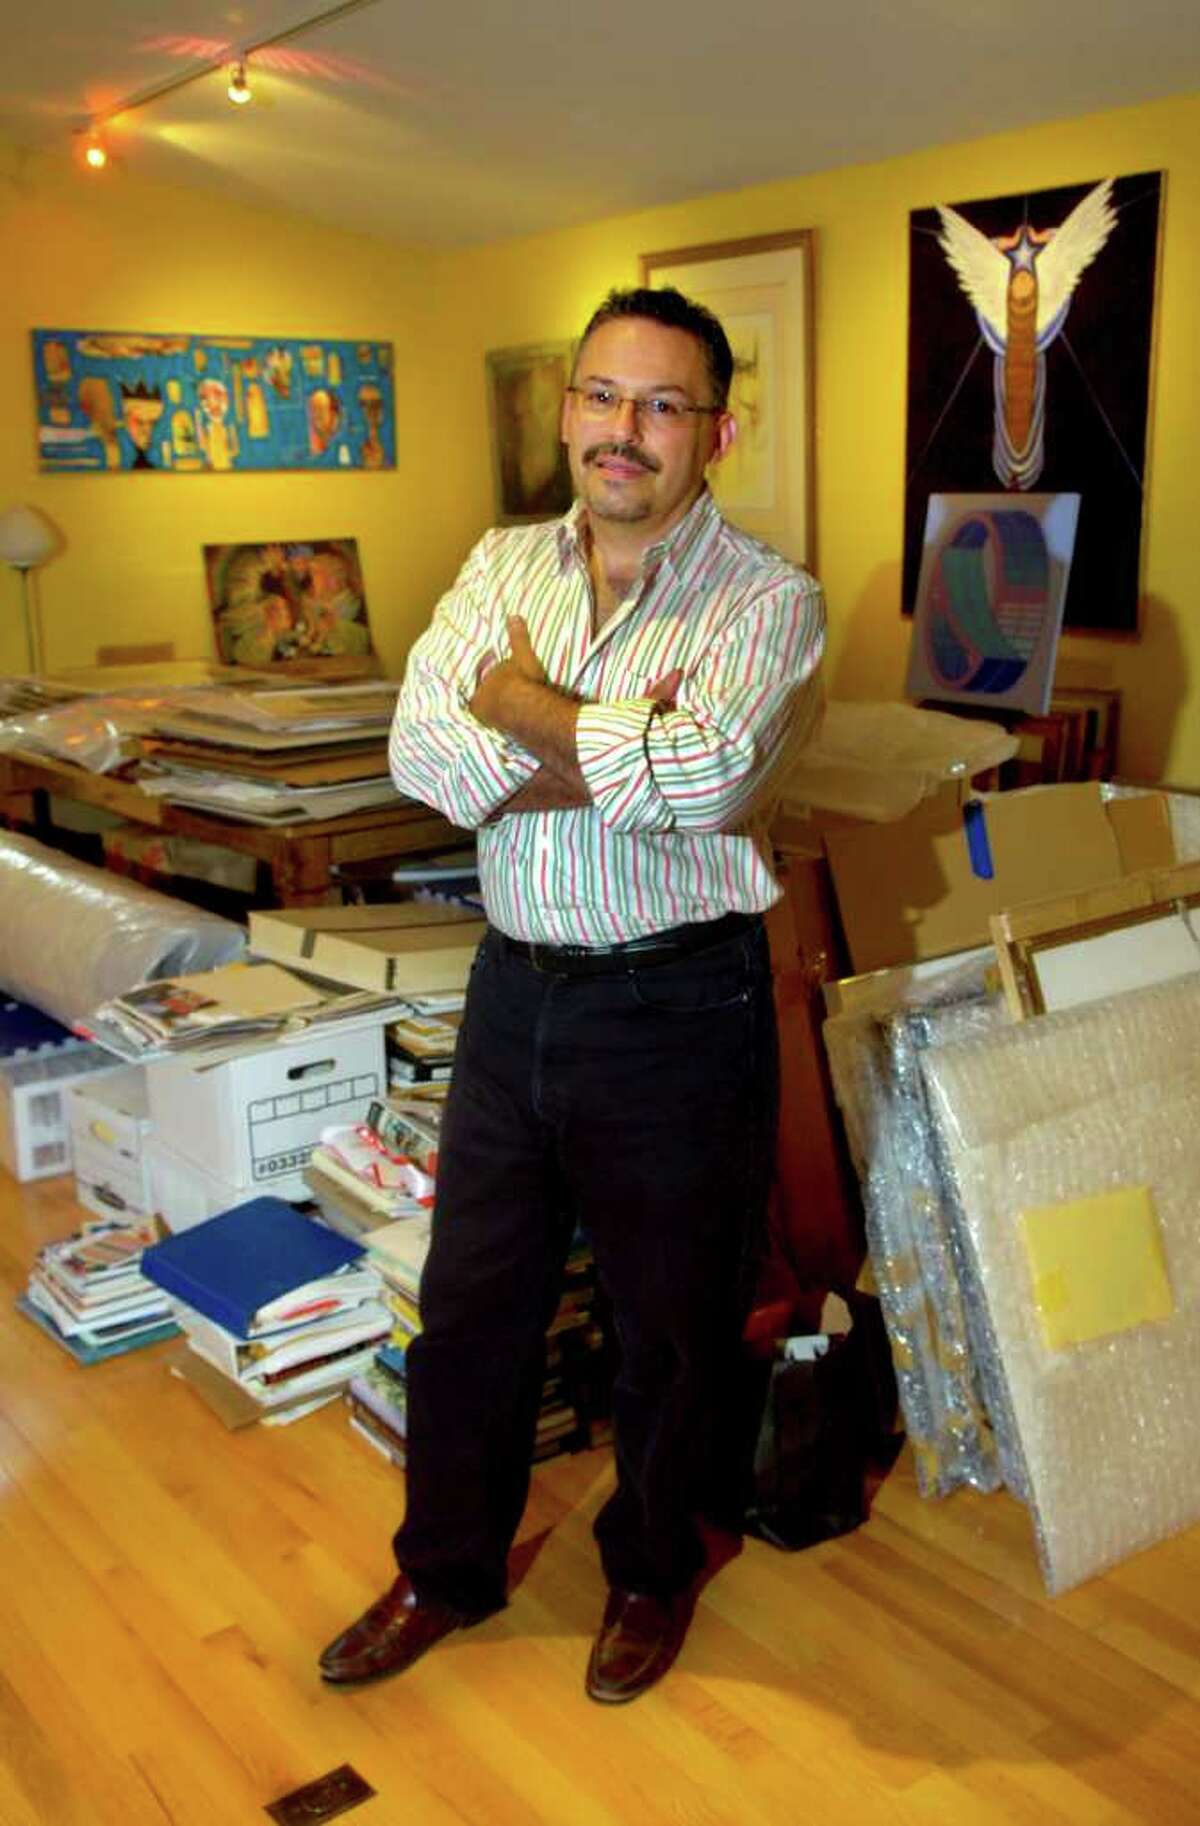 Ben Ortiz poses for a photo surrounded by his library of books and artwork stored in the studio on his property in Ridgefield. Ortiz is curating four art shows simultaneously in September.